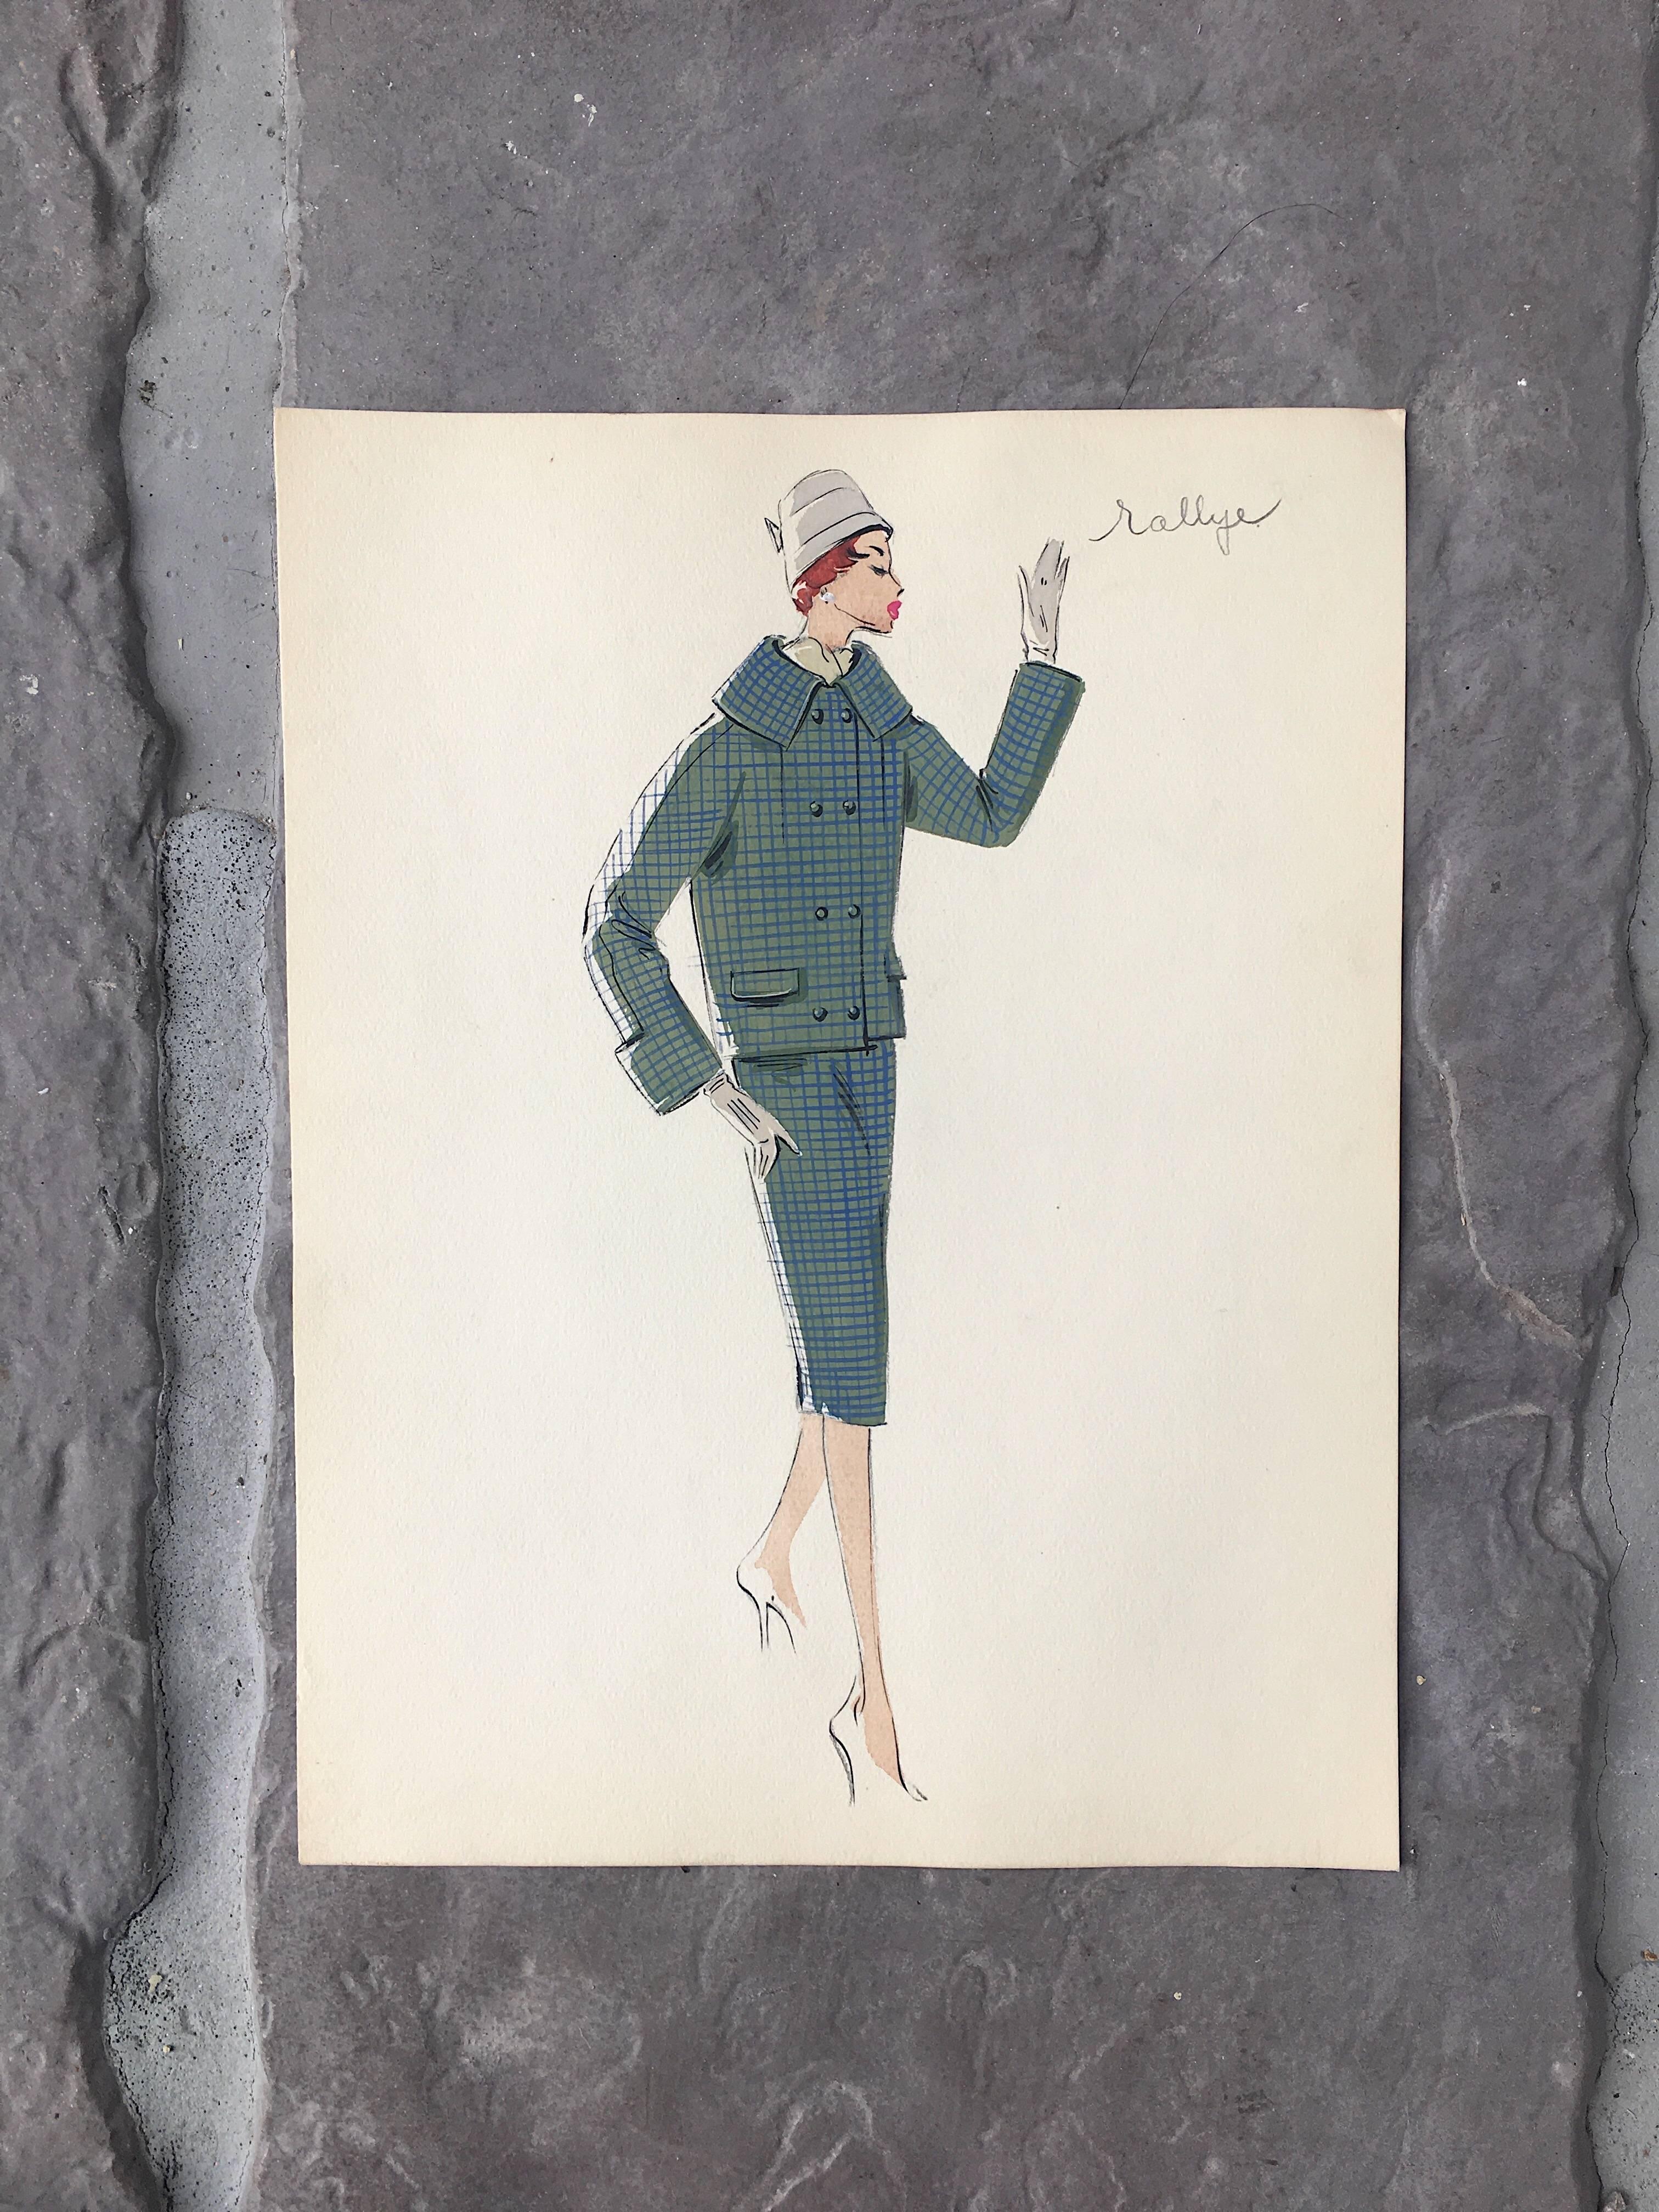 Lady in Teal Two Piece 1950's Parisian Fashion Illustration Sketch - Art by Unknown